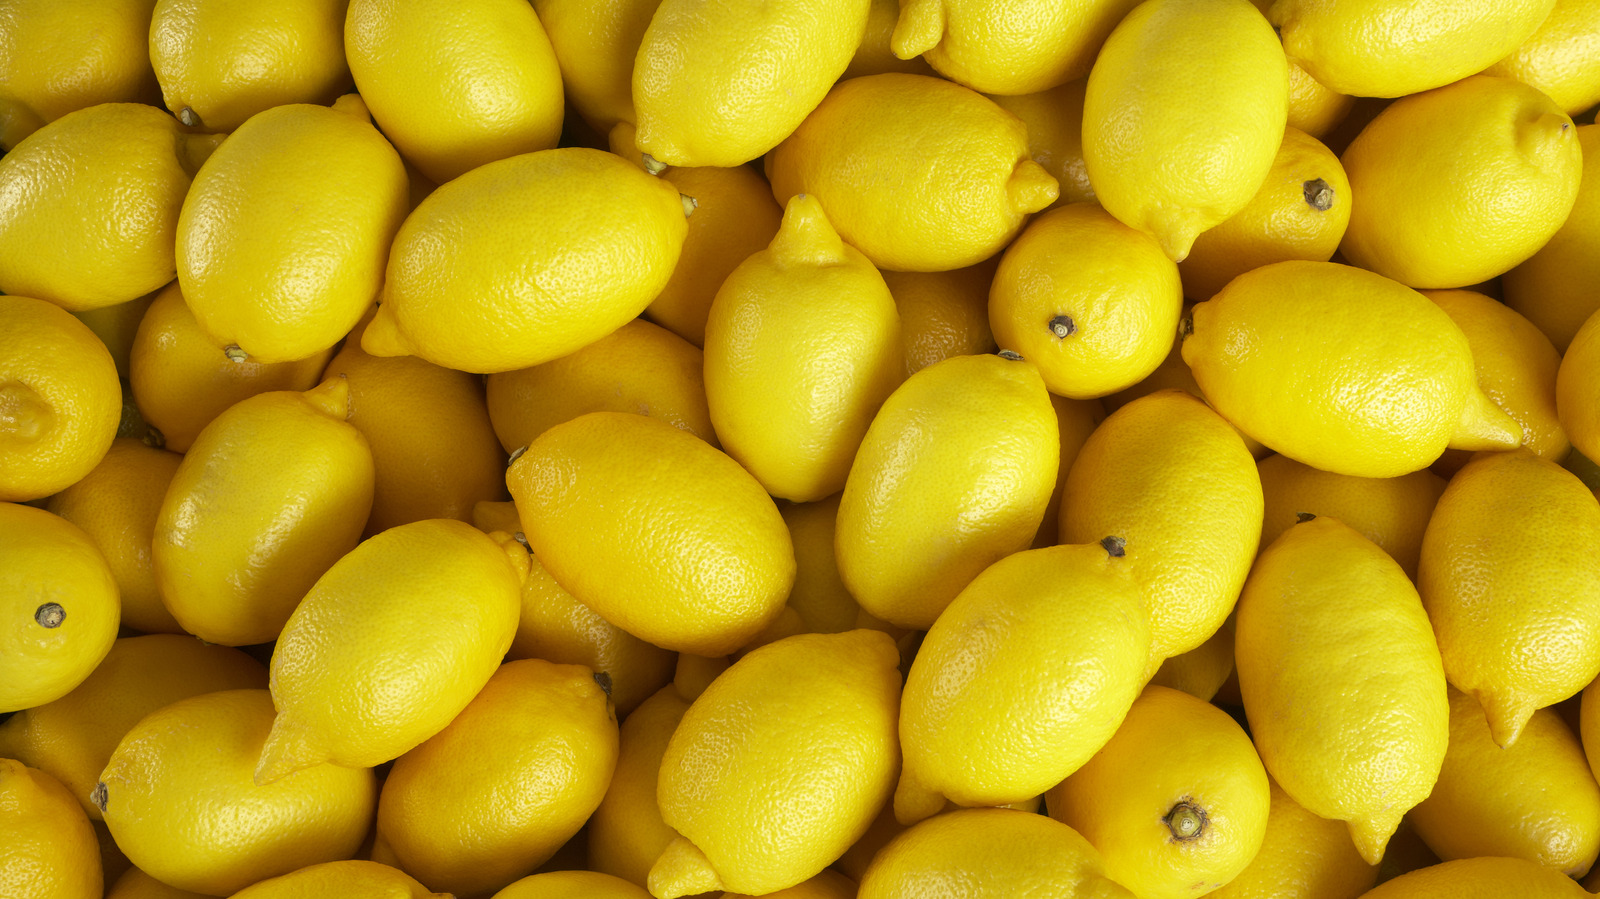 https://www.foodrepublic.com/img/gallery/22-ways-to-naturally-clean-your-kitchen-with-fresh-lemon/l-intro-1687376911.jpg